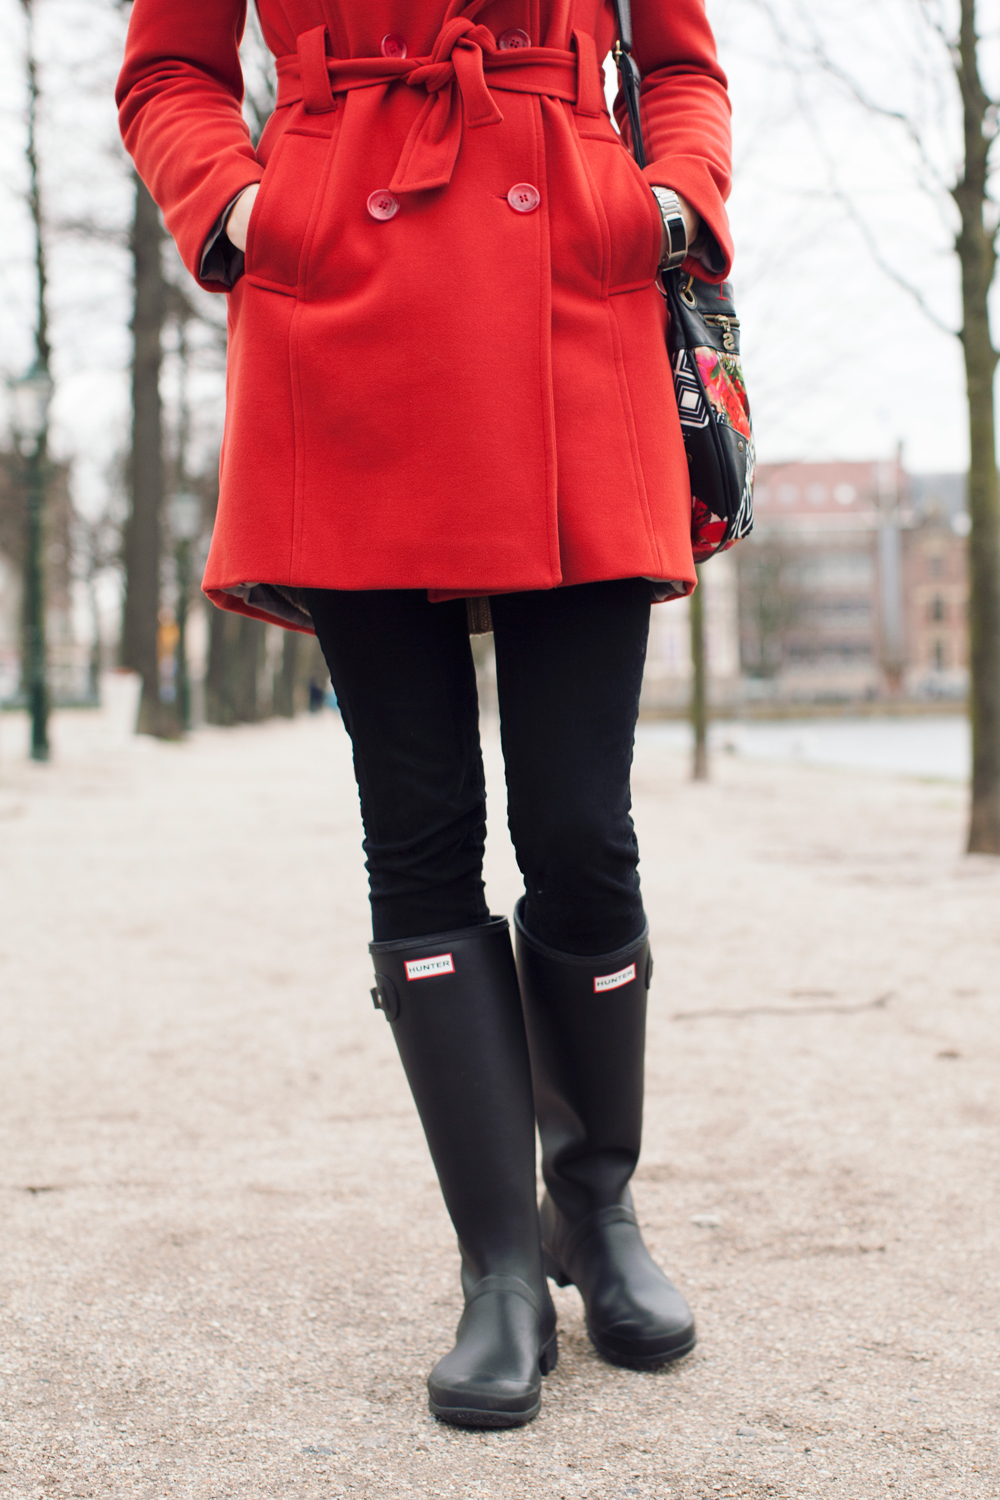 Strolling the city in a red Peacoat - Tea Cups & Tulips